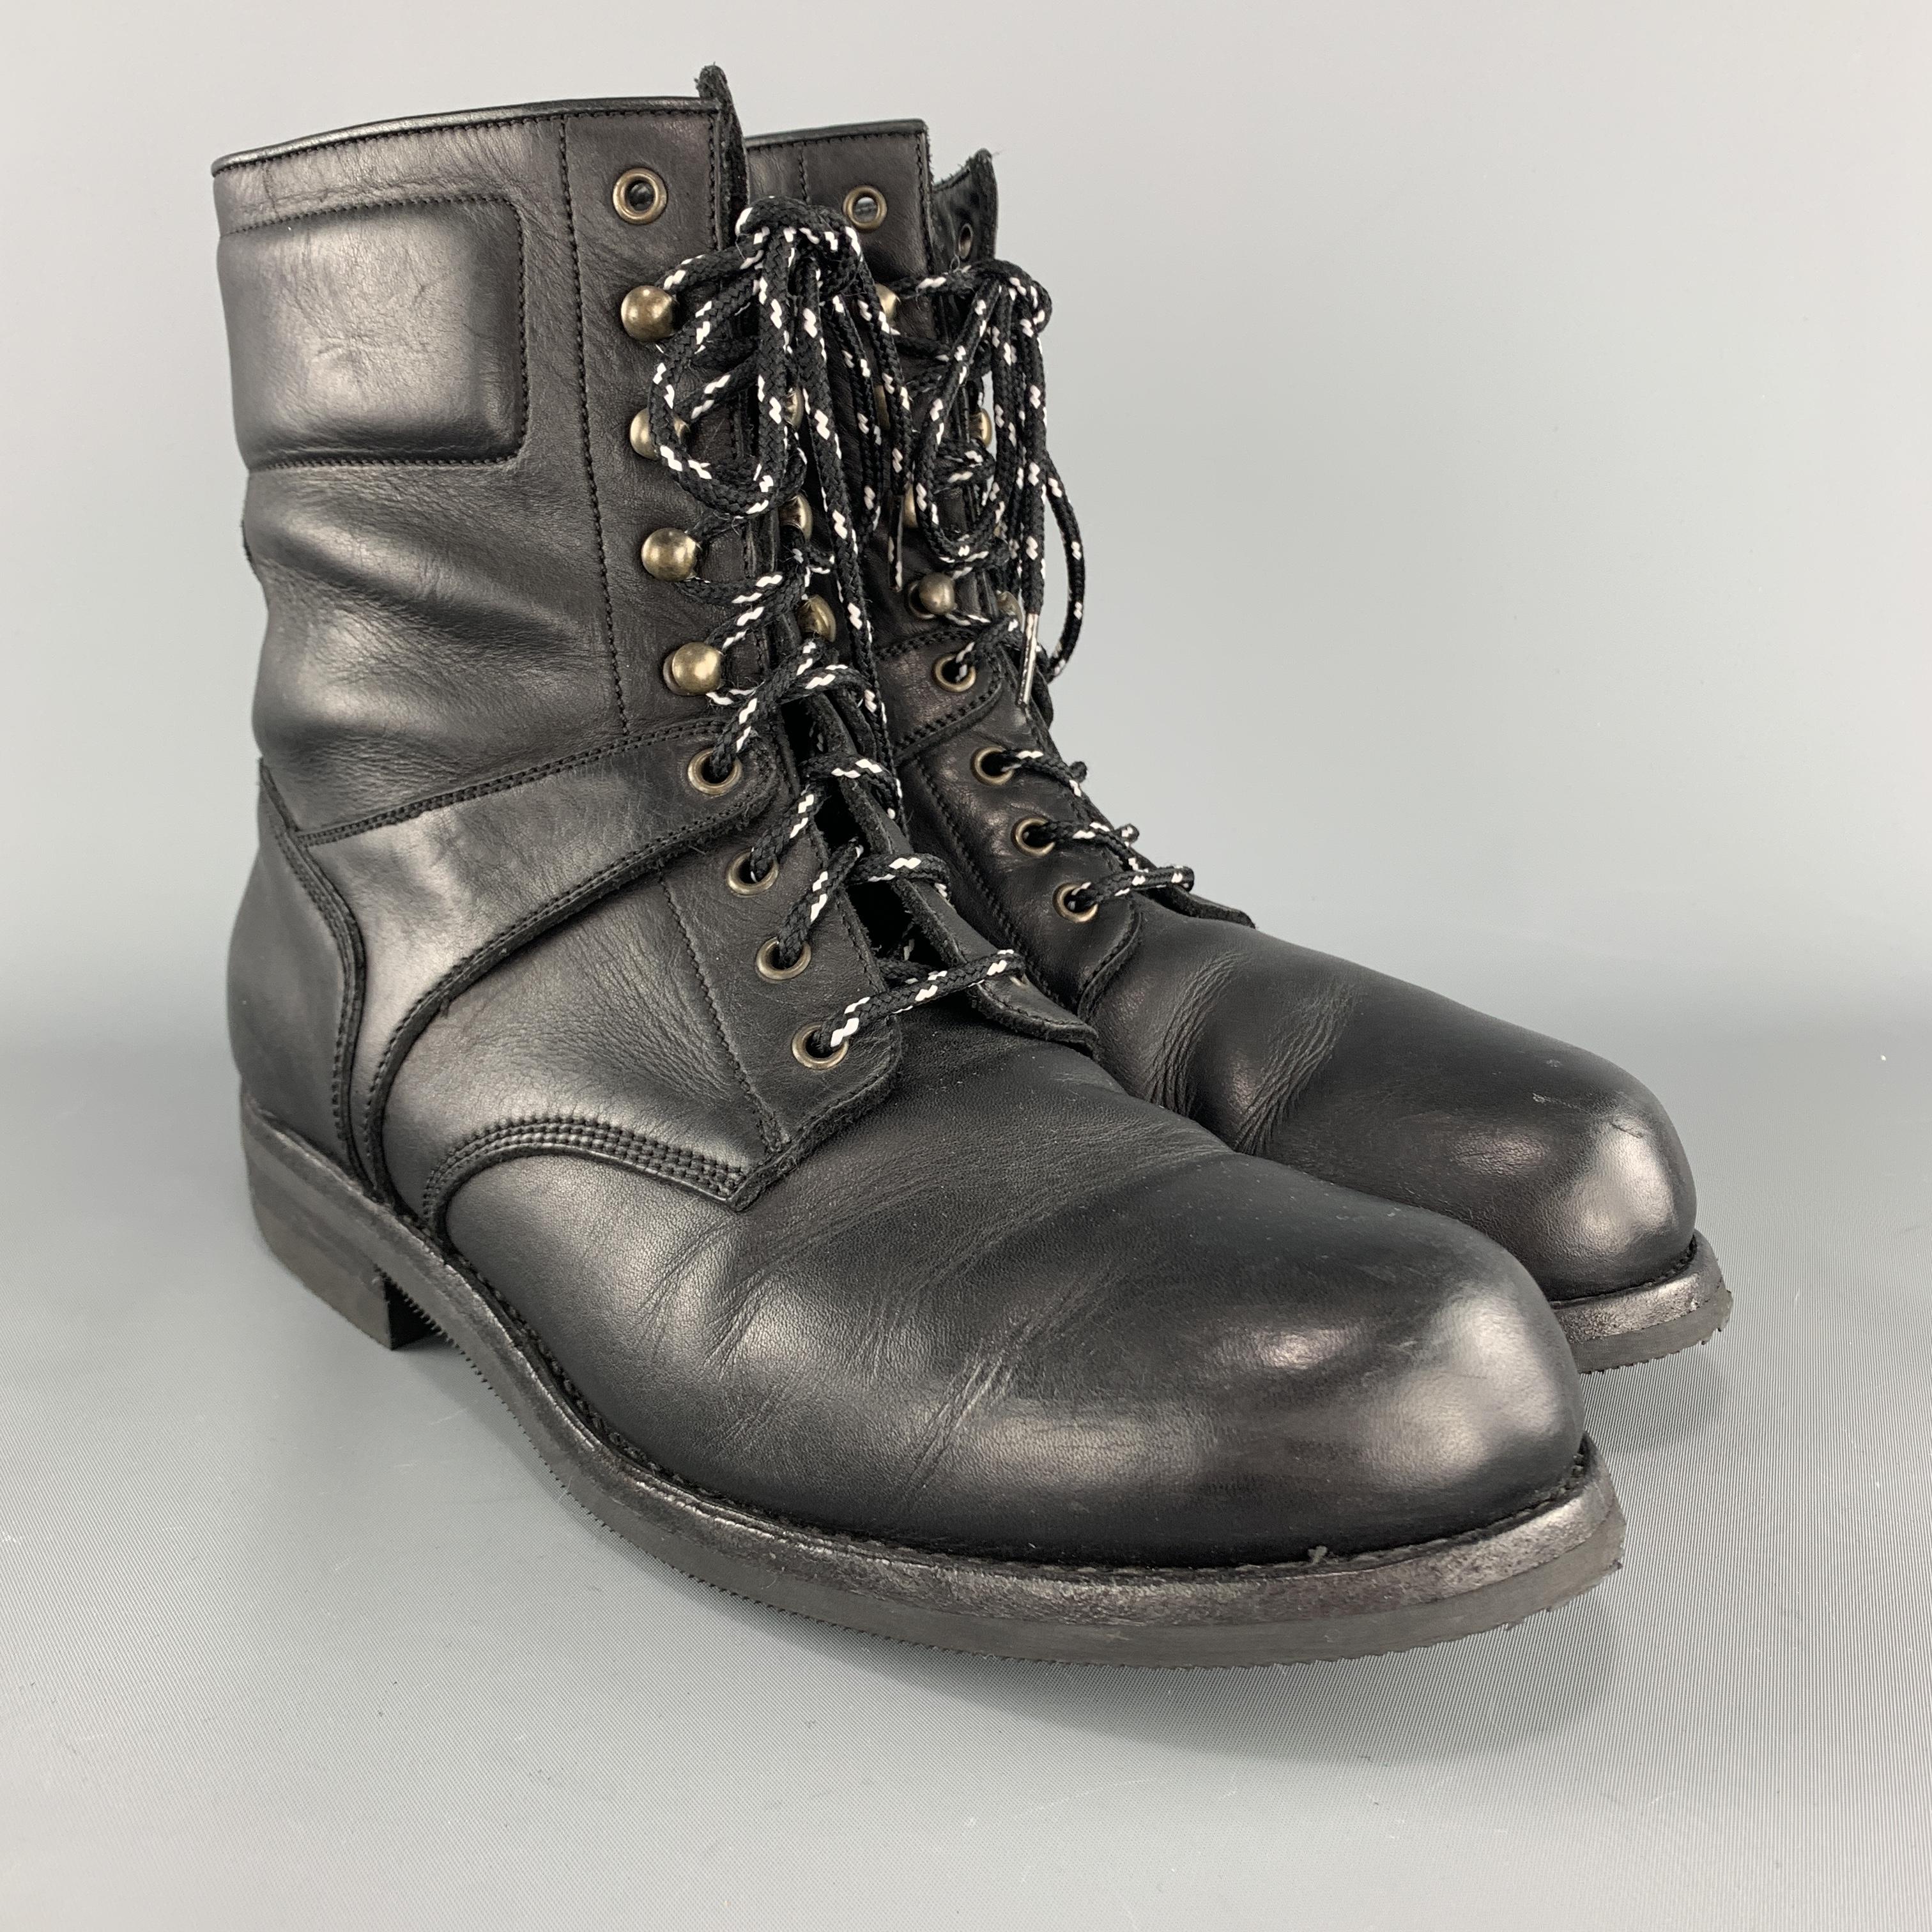 RALPH LAUREN PURPLE LABEL combat boots come in black leather with grommet and hook lace up front, panels, and rubber sole. Made in Italy.

Excellent Pre-Owned Condition.
Marked: UK 11 D

Outsole: 12 x 4.5 in.
Length: 7.5 in.